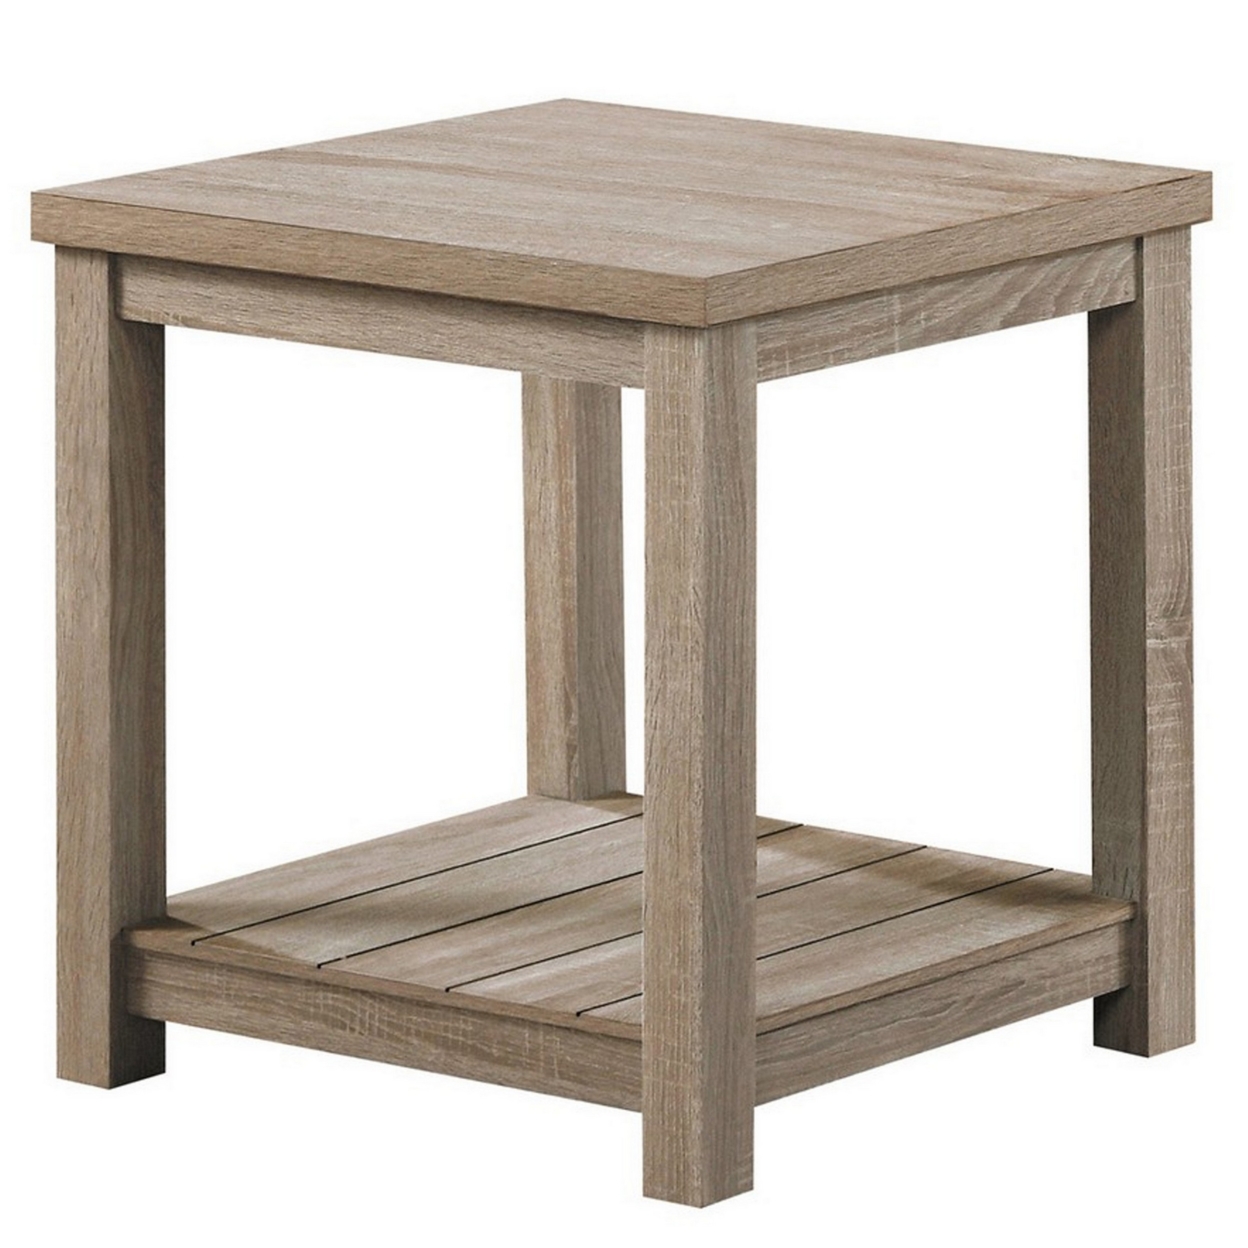 3 Piece Rectangular Coffee And Square End Table Set, Slatted, Gray Beige